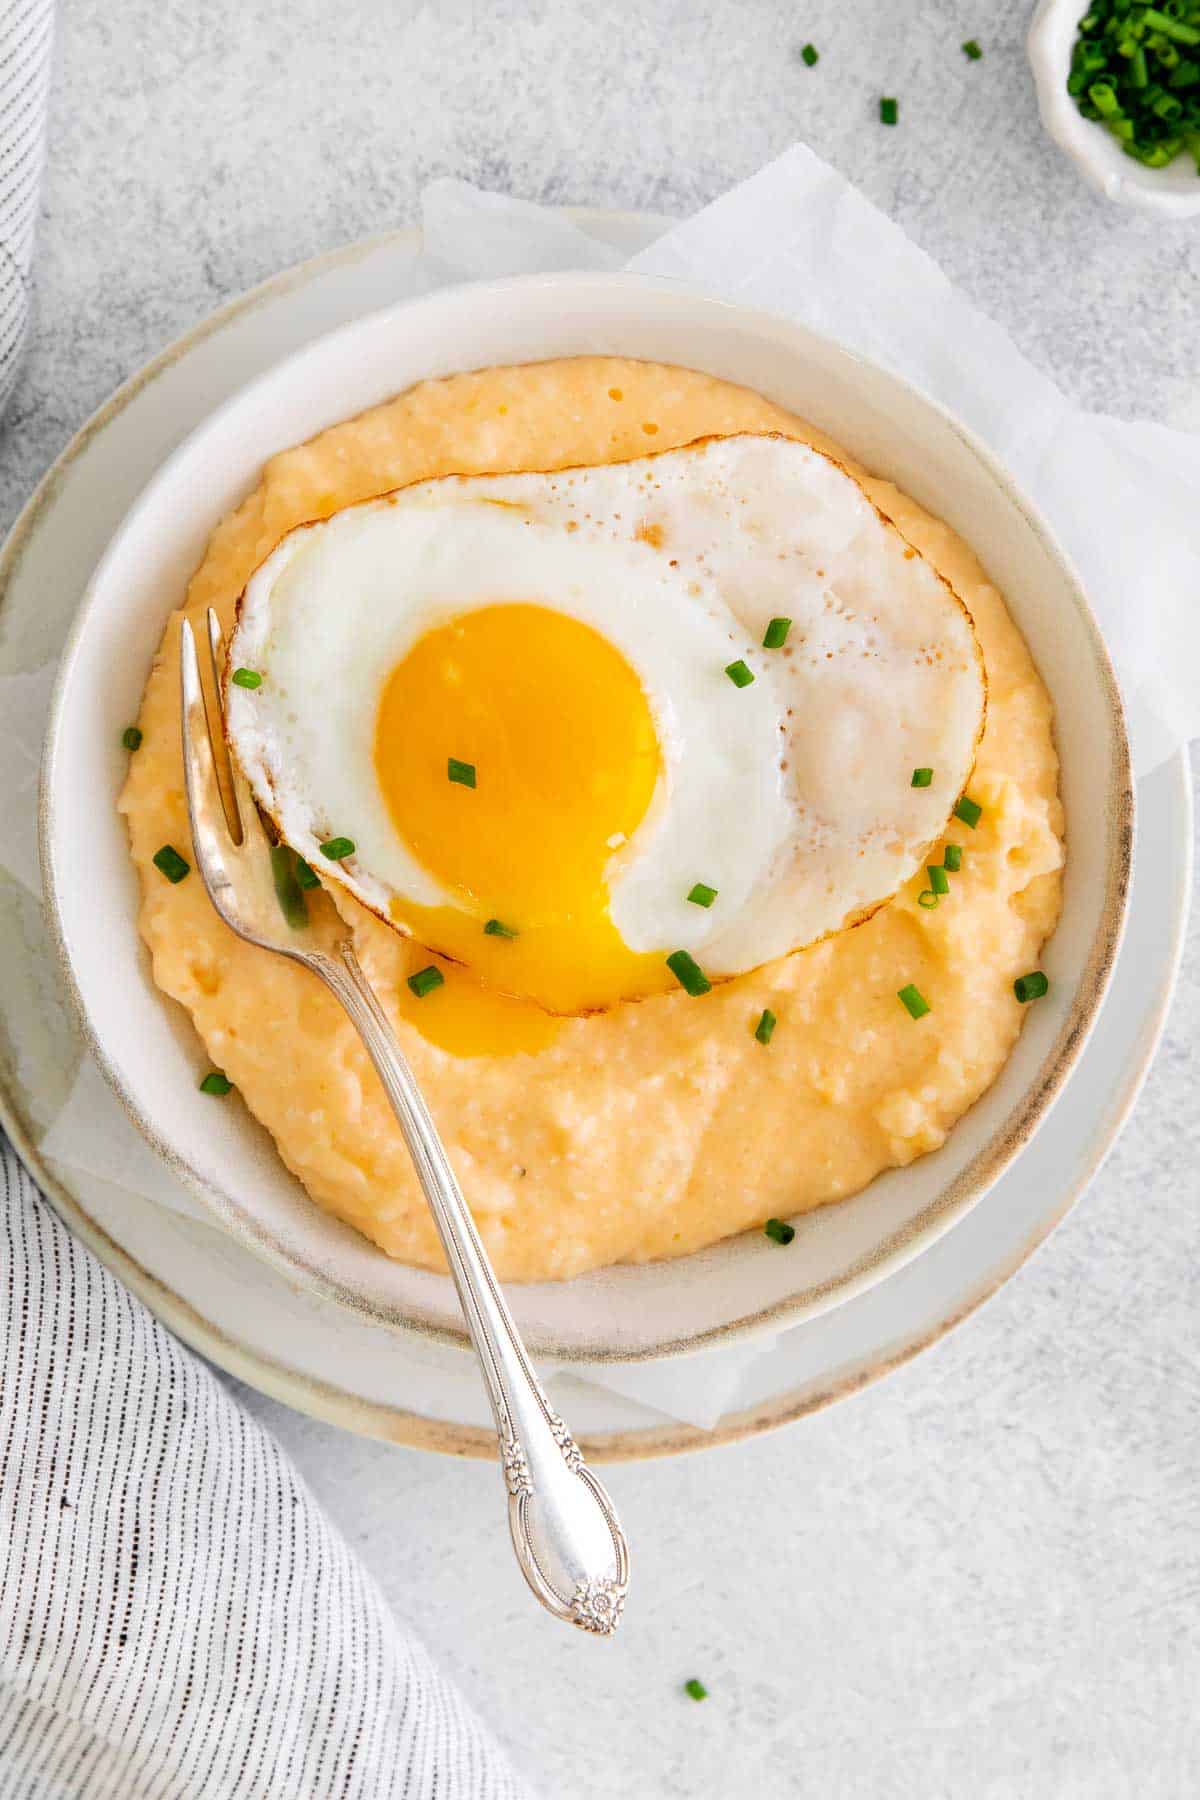 Grits and eggs in a bowl with a spoon